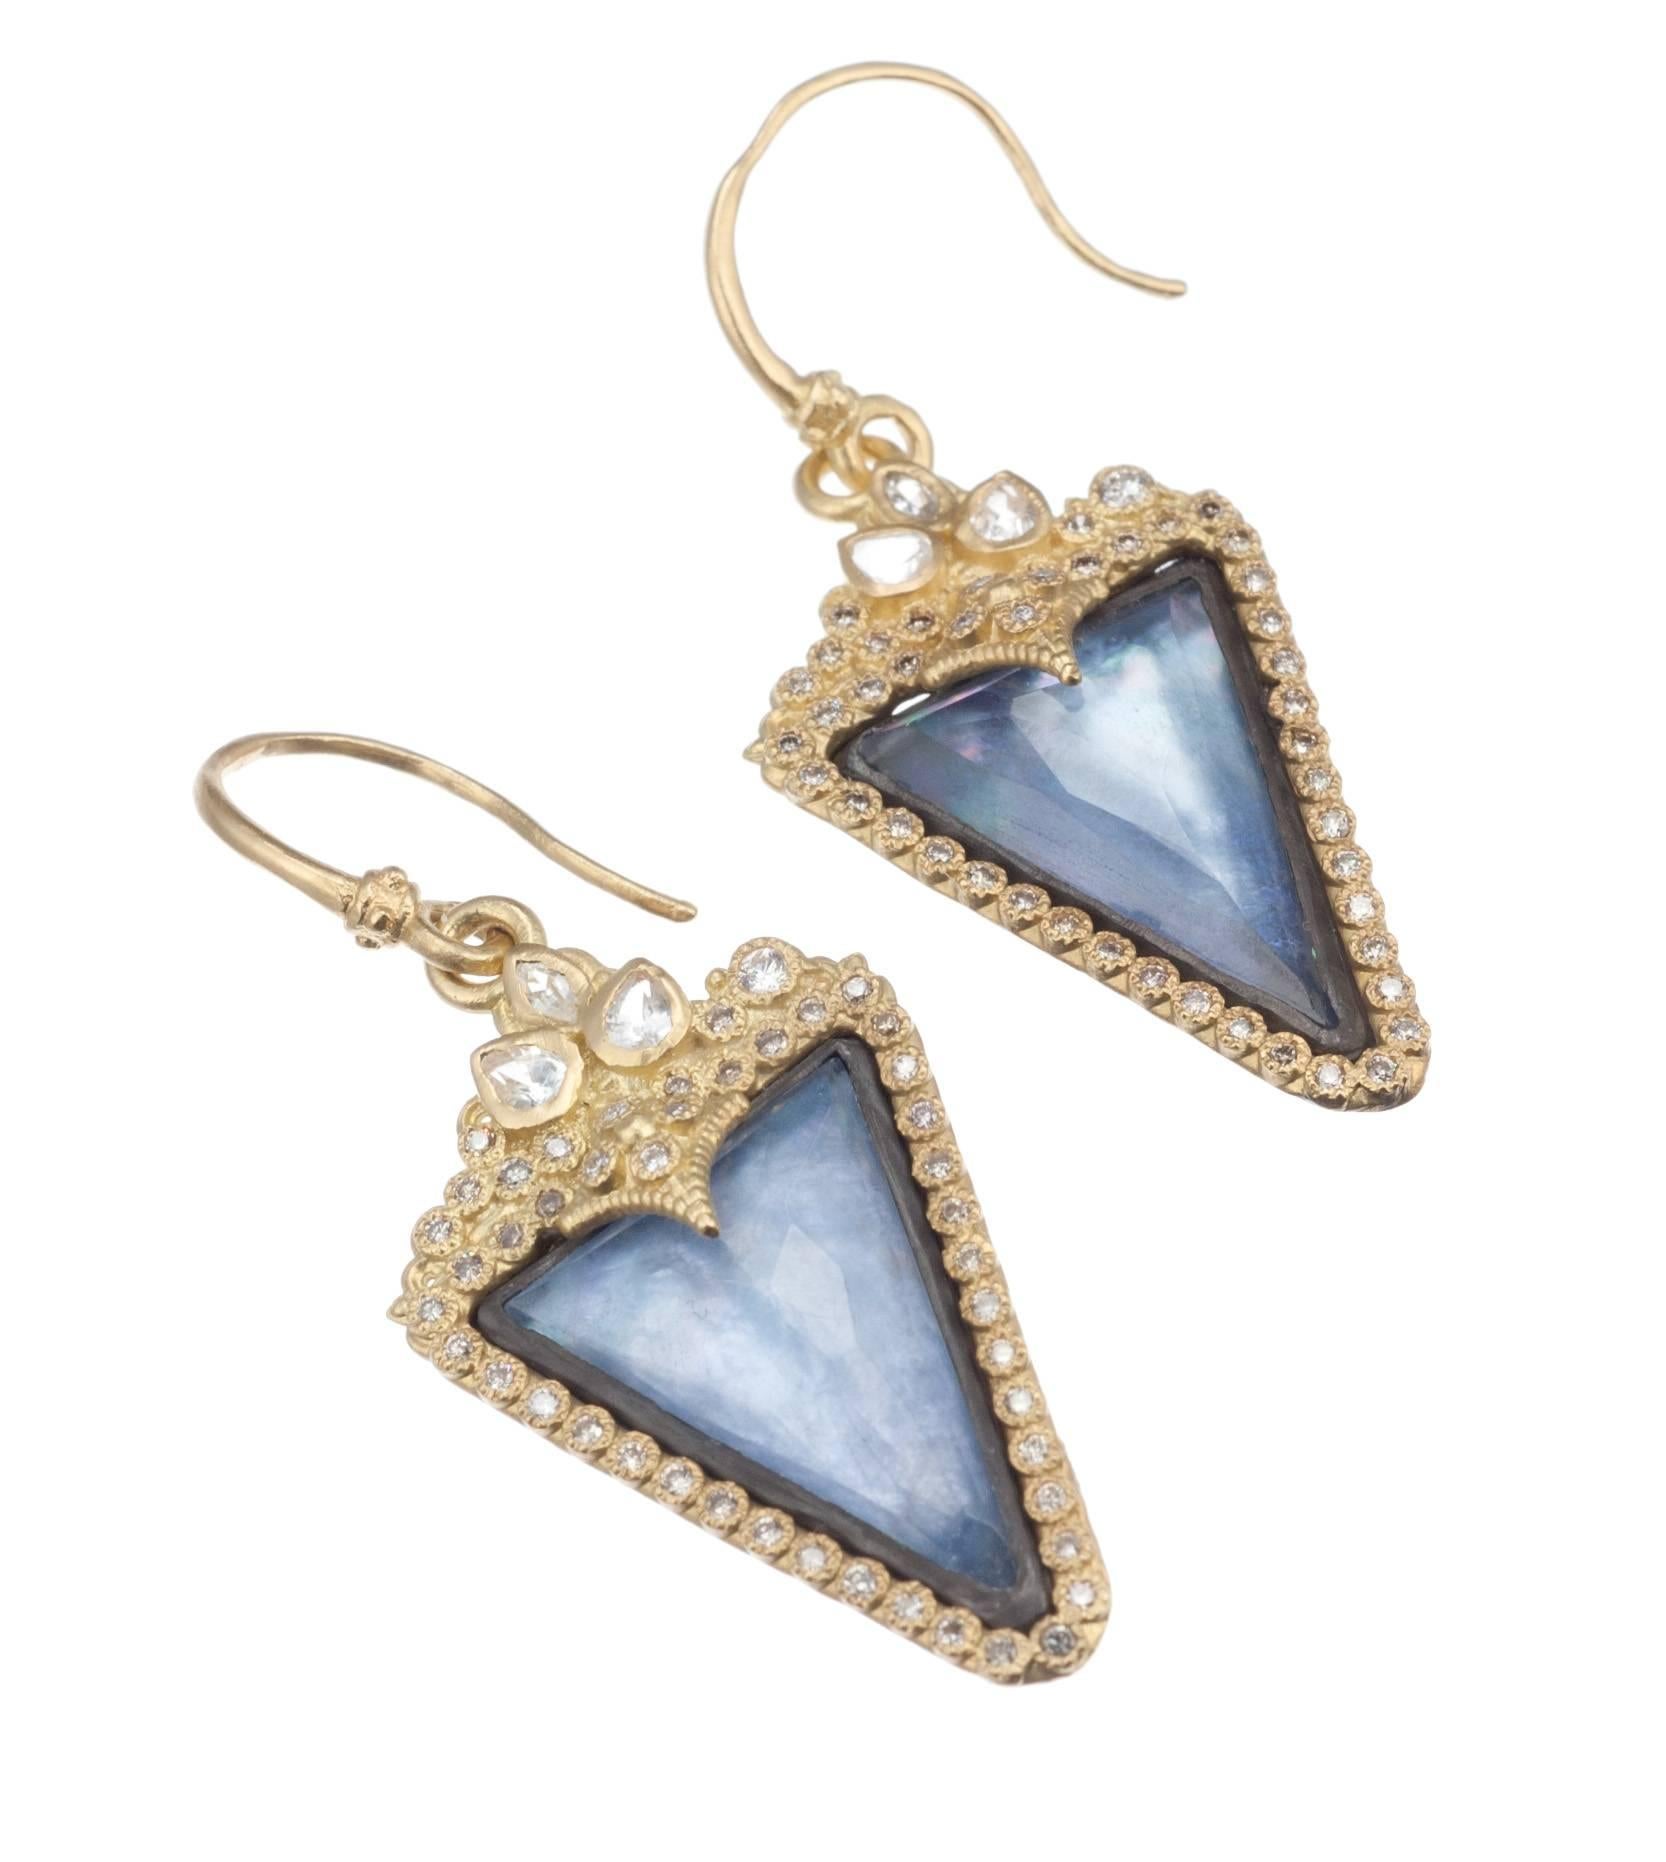 Part of the “Old World” collection from Armenta, a pair of drop earrings set with striking pale blue centerpiece triplets of sliced blue sapphire, a translucent layer of mother-of-pearl and a triangular quartz top. The old world charm continues with